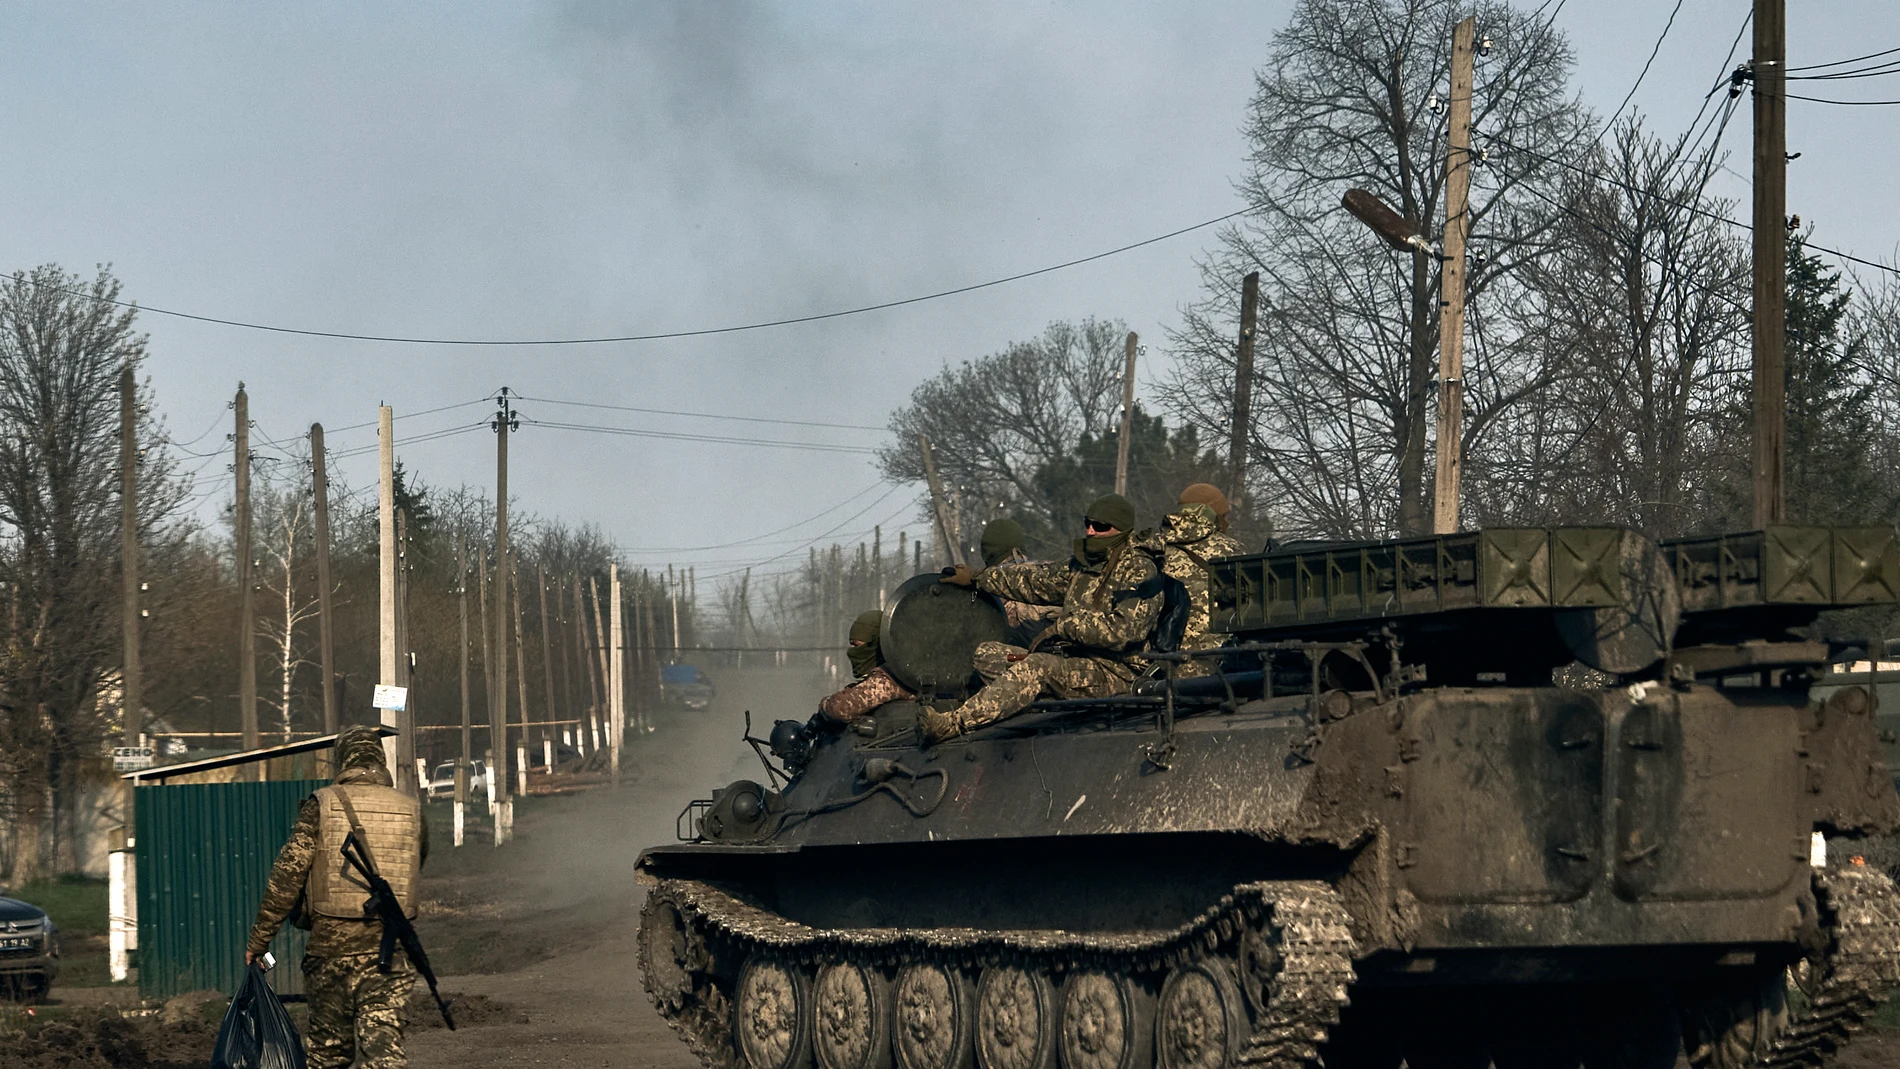 Ukrainian soldiers ride atop an APC in the heaviest battles with the Russian invaders in Bakhmut, Donetsk region, Ukraine, Sunday, April 9, 2023. (AP Photo/Libkos)